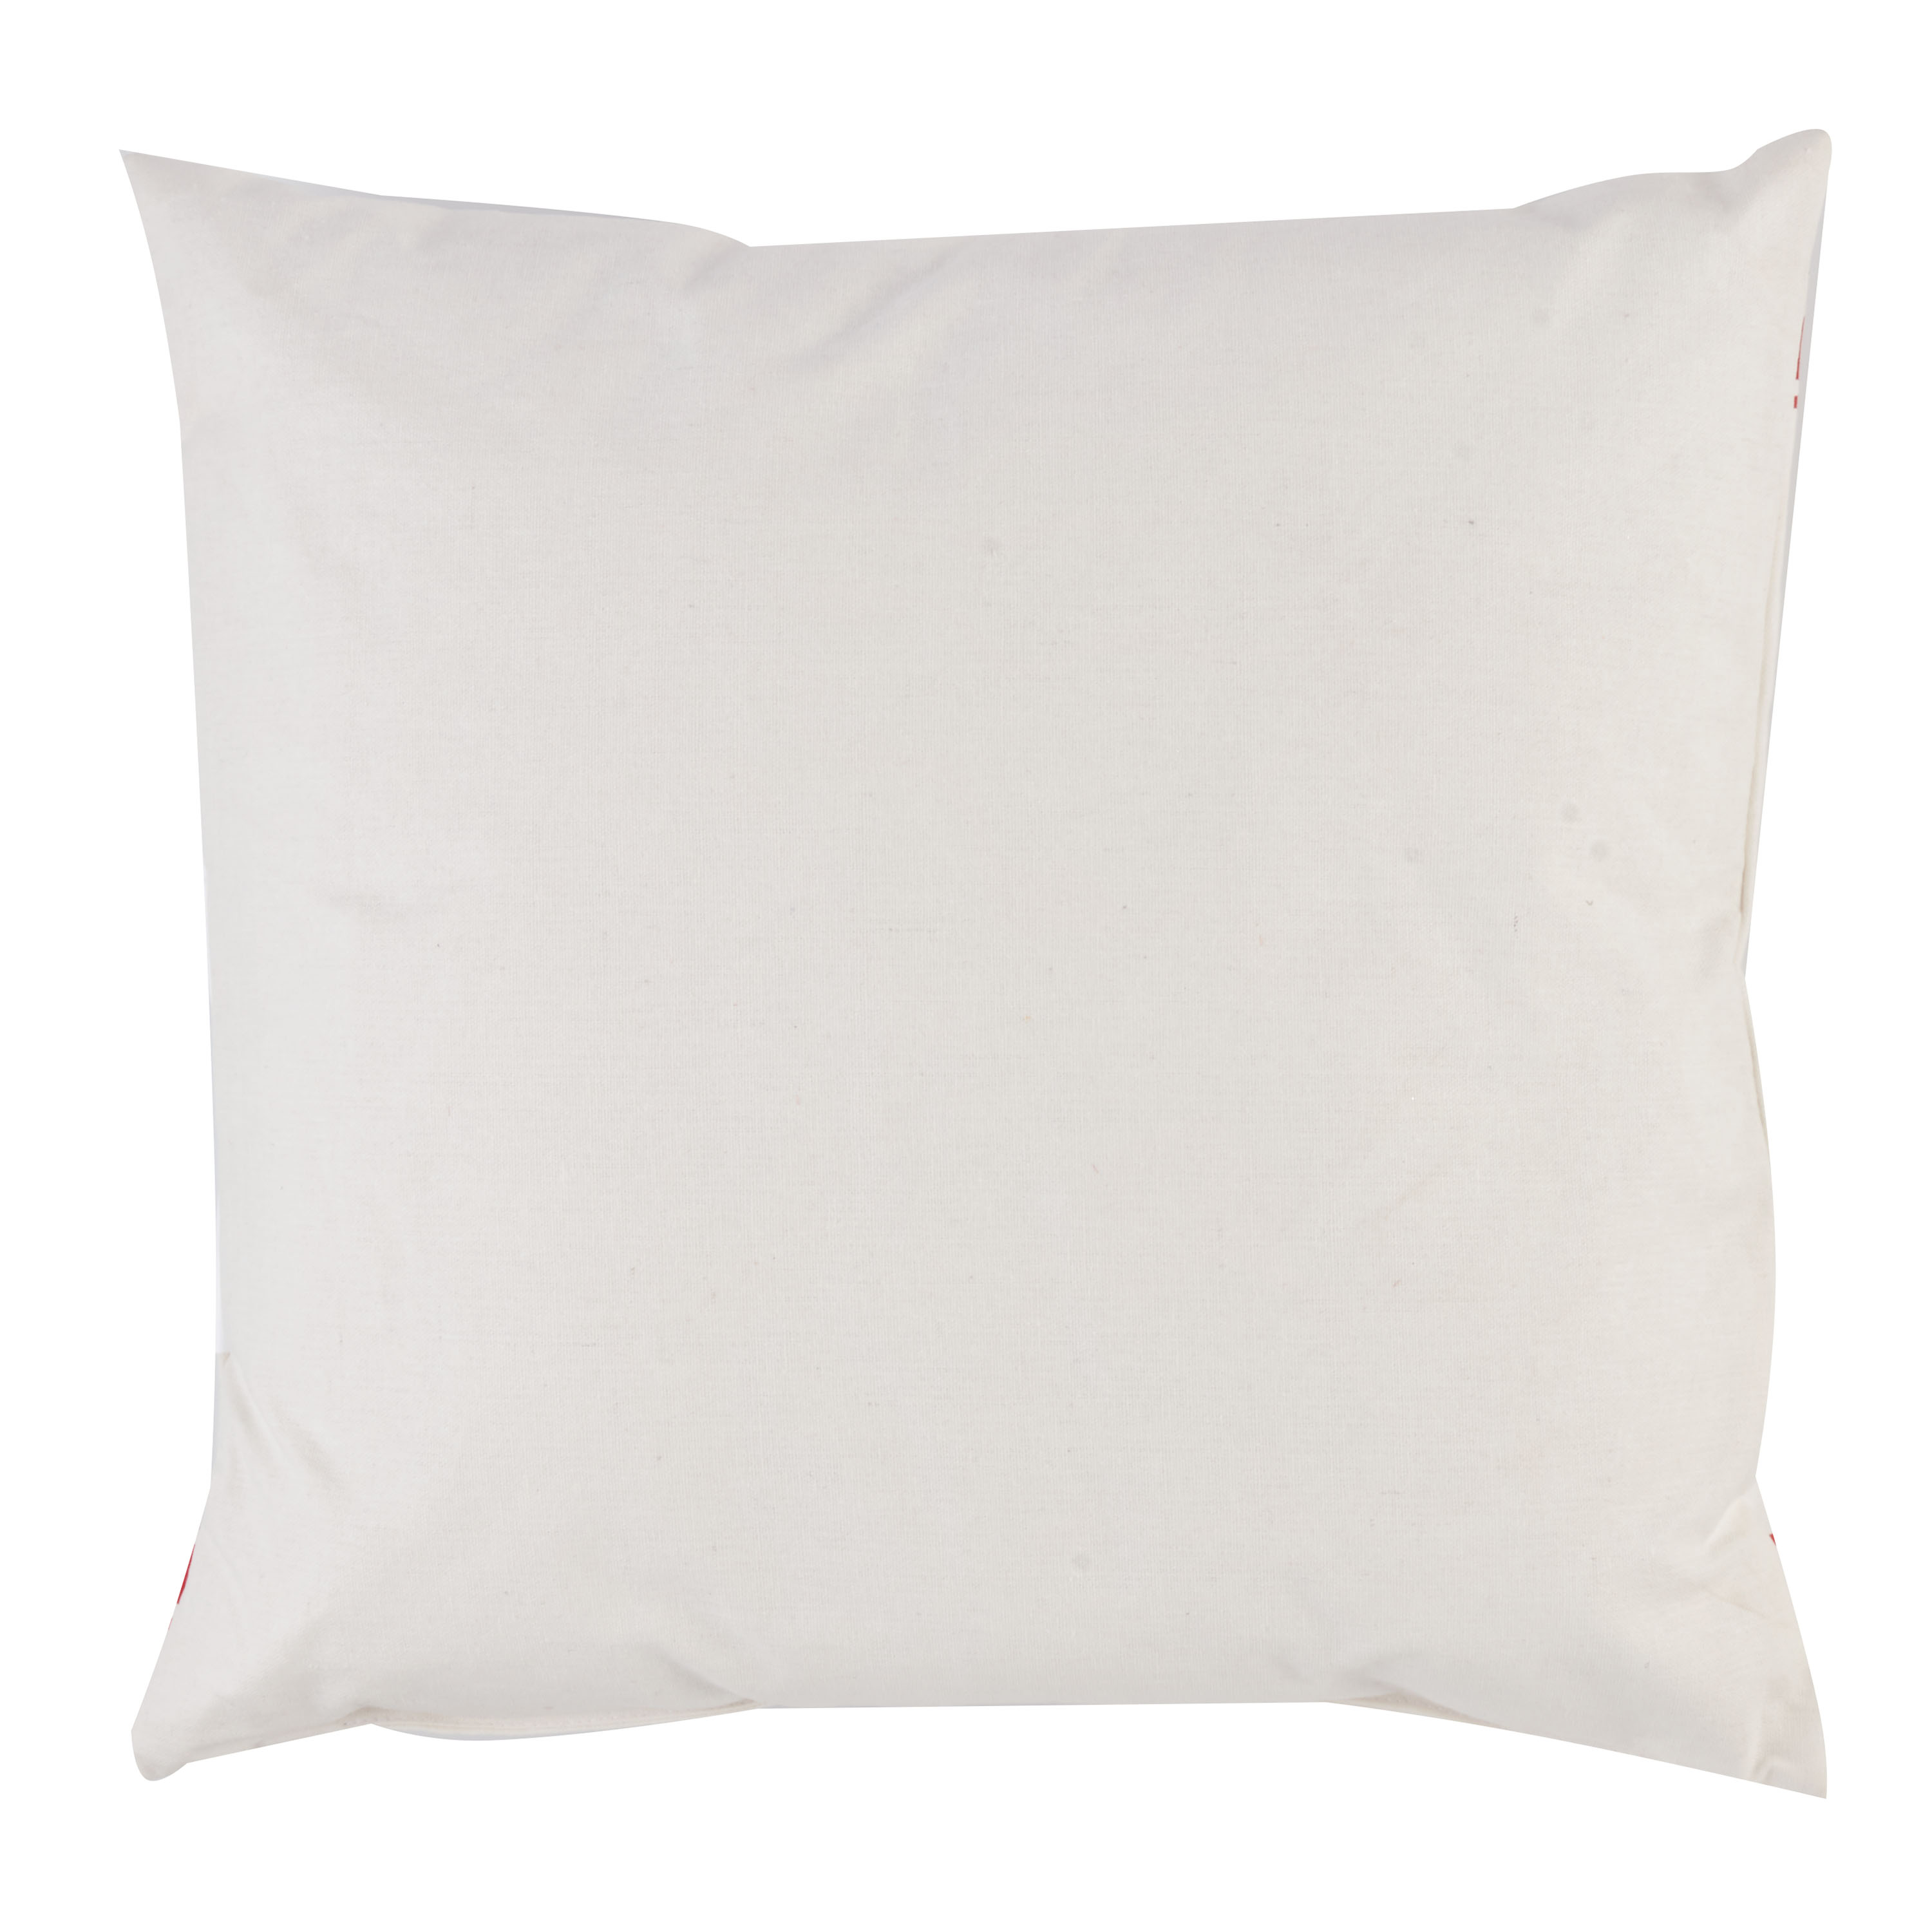 Holiday Time Merry Christmas to You All Decorative Throw Pillow, 16" x 16", White - image 2 of 5